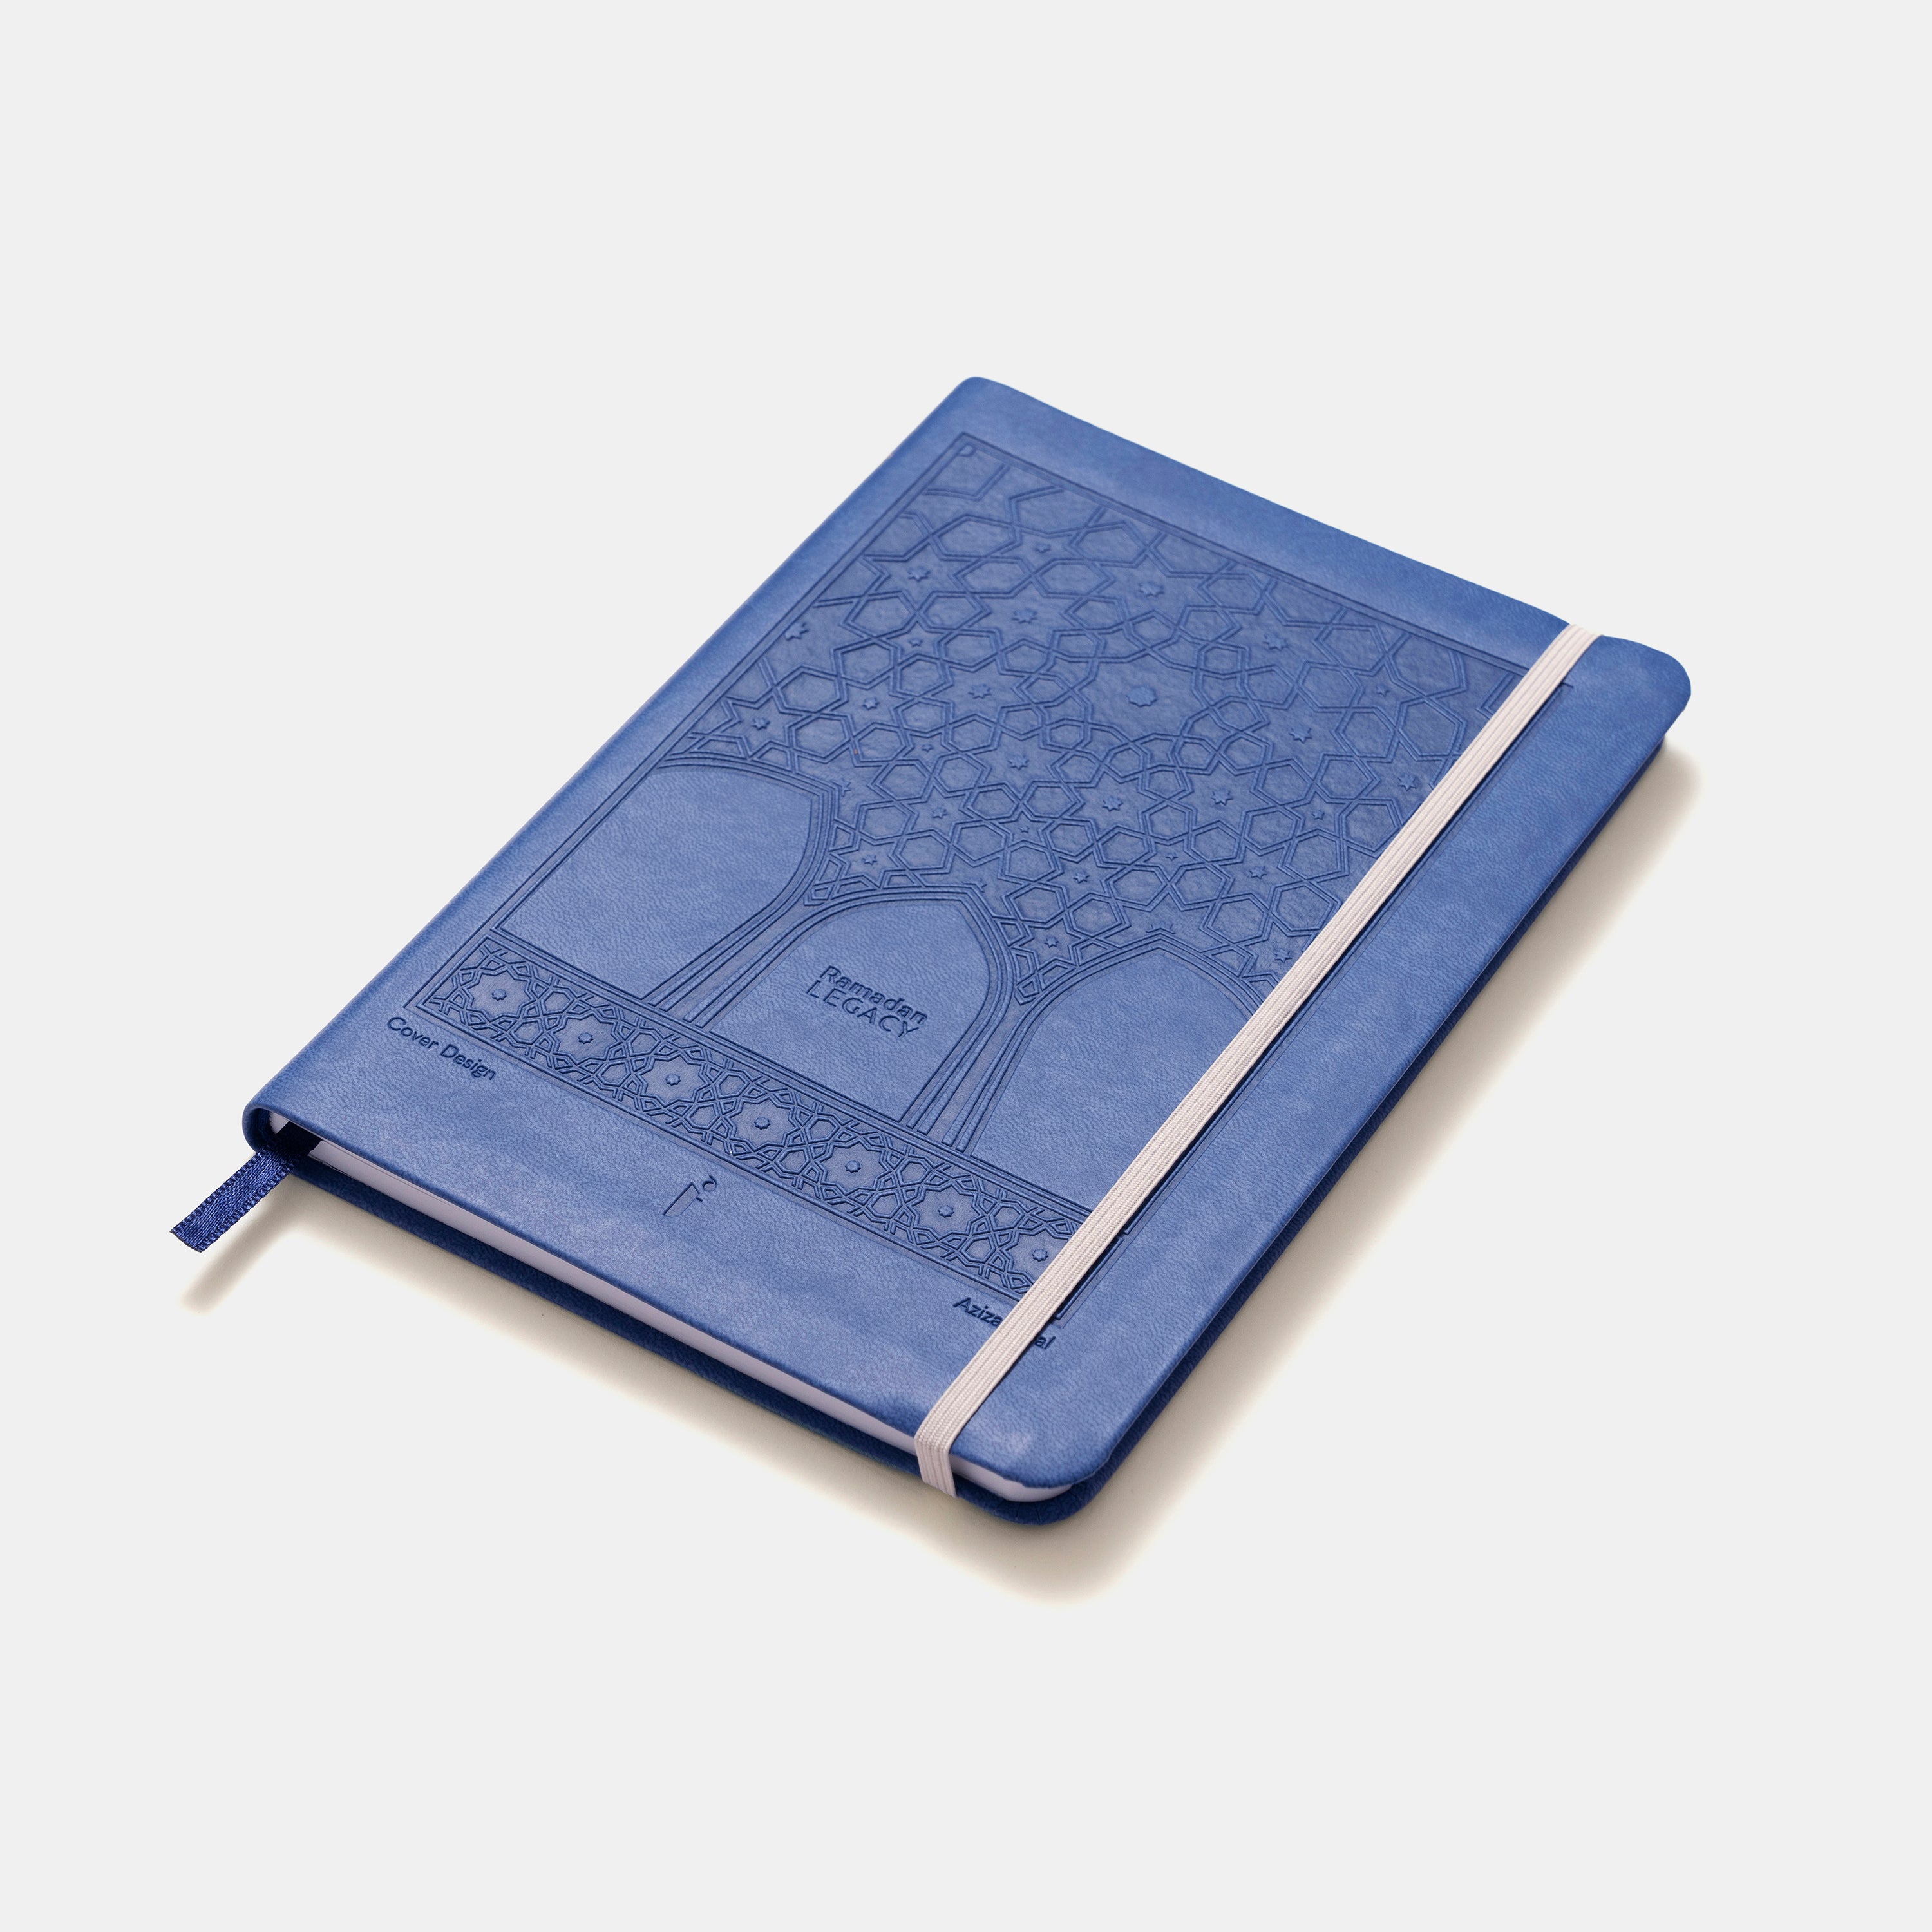 Night Edition Planner By Towards Faith. Step away from the noisy digital world and dive deep into your spirituality this Ramadan without distractions. It’s time to reflect and build a life that truly matters to you. The Ramadan Legacy planner gives you a roadmap to reflect, plan and succeed in your religious goals through the blessed month. Includes a combination worship guide, reflective exercises, Ramadan goal planning and a daily planner.